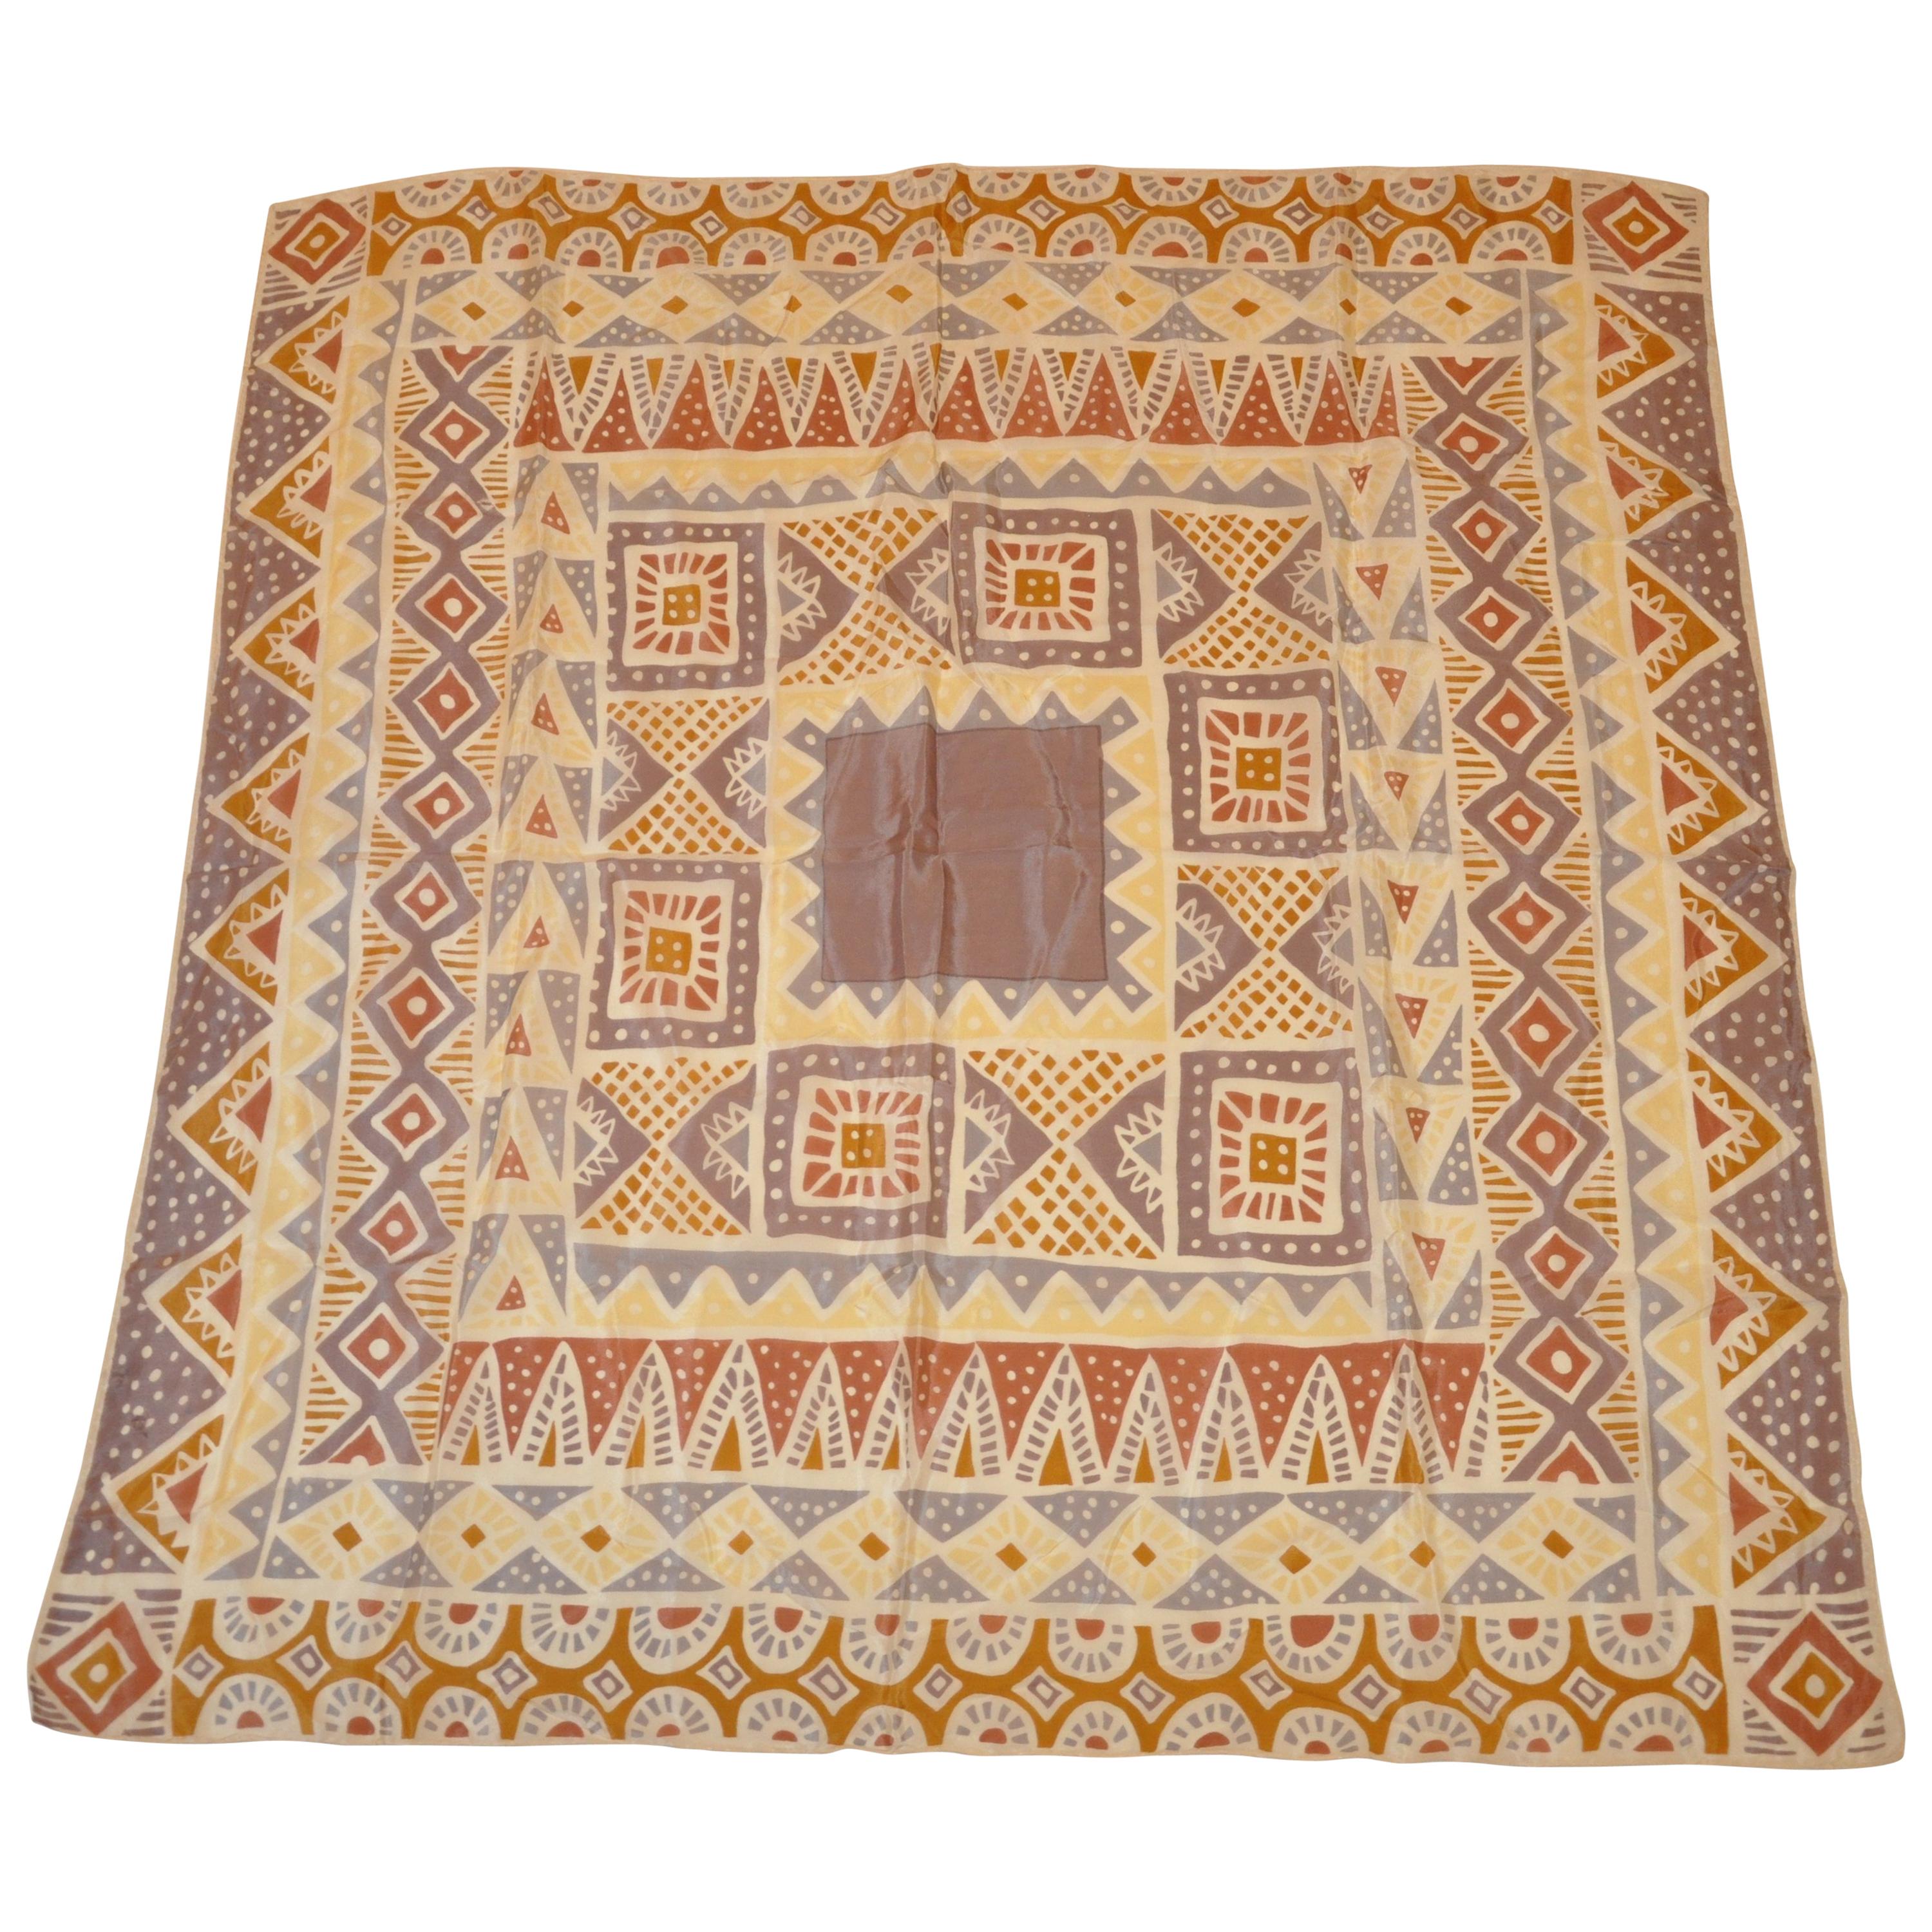 Shades of Beiges and Taupe "Tribal Print" Silk Scarf For Sale